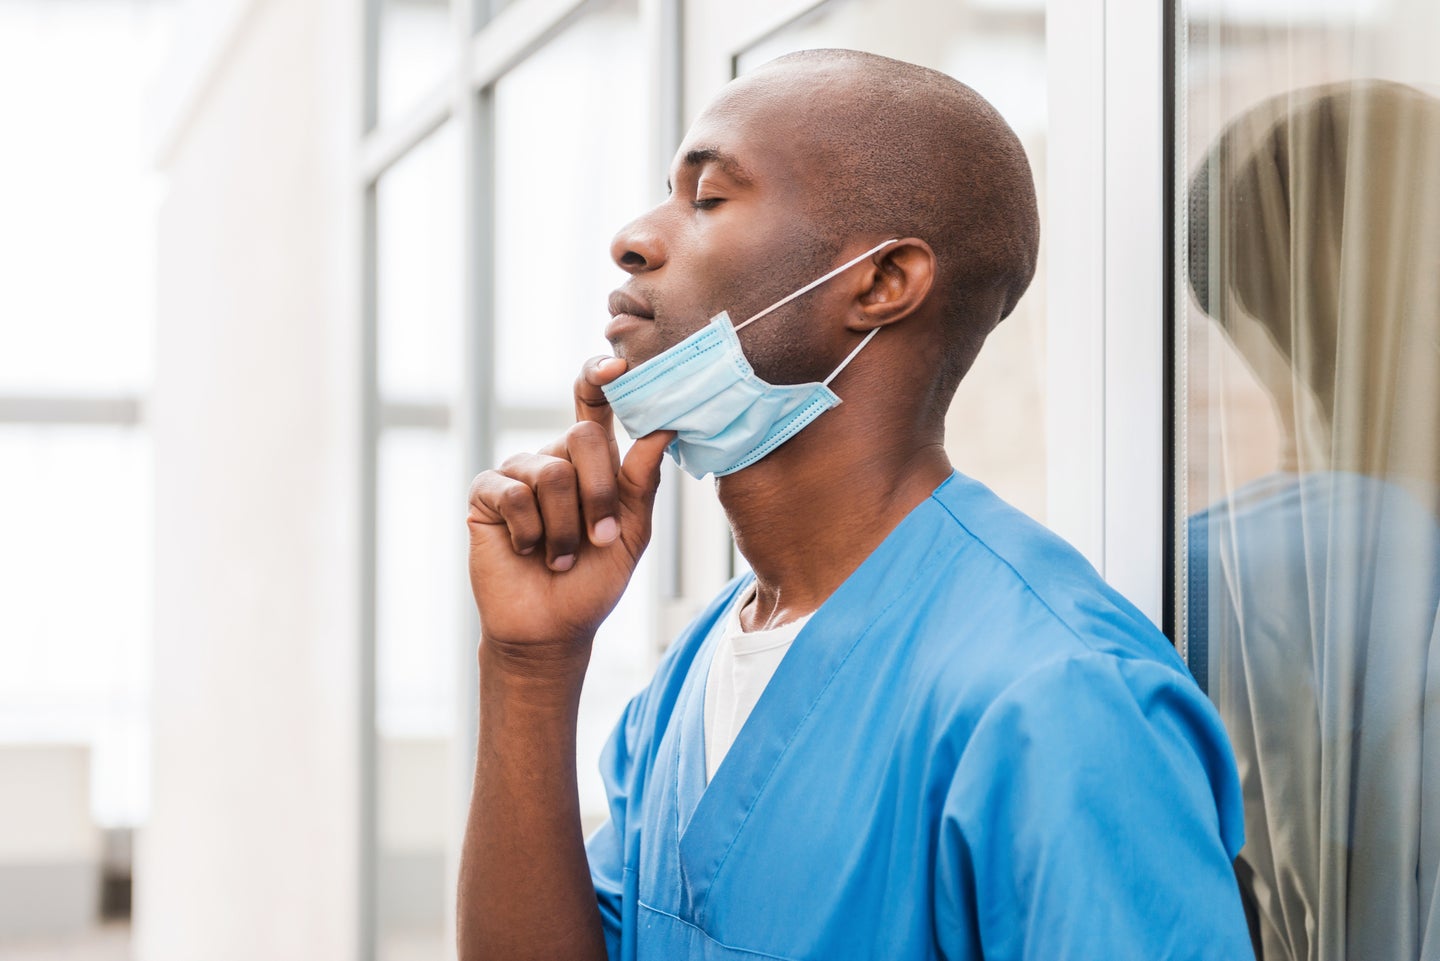 A surgeon in scrubs pulling a mask off their face